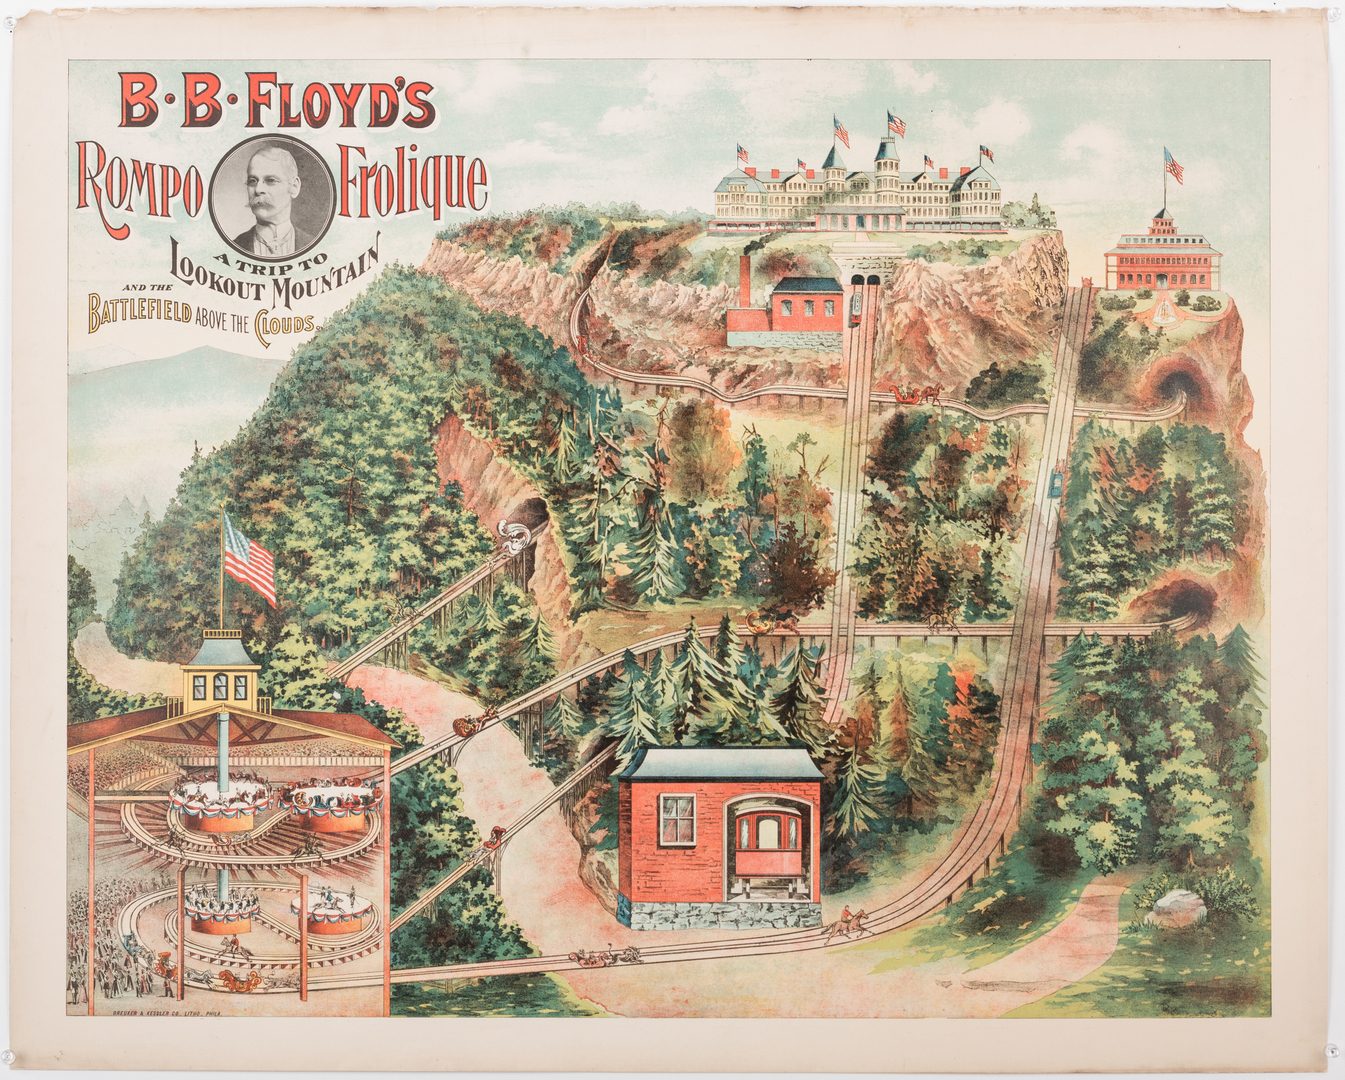 Lot 806: "Rompo Frolique Lookout Mountain" Chromolithograph Poster